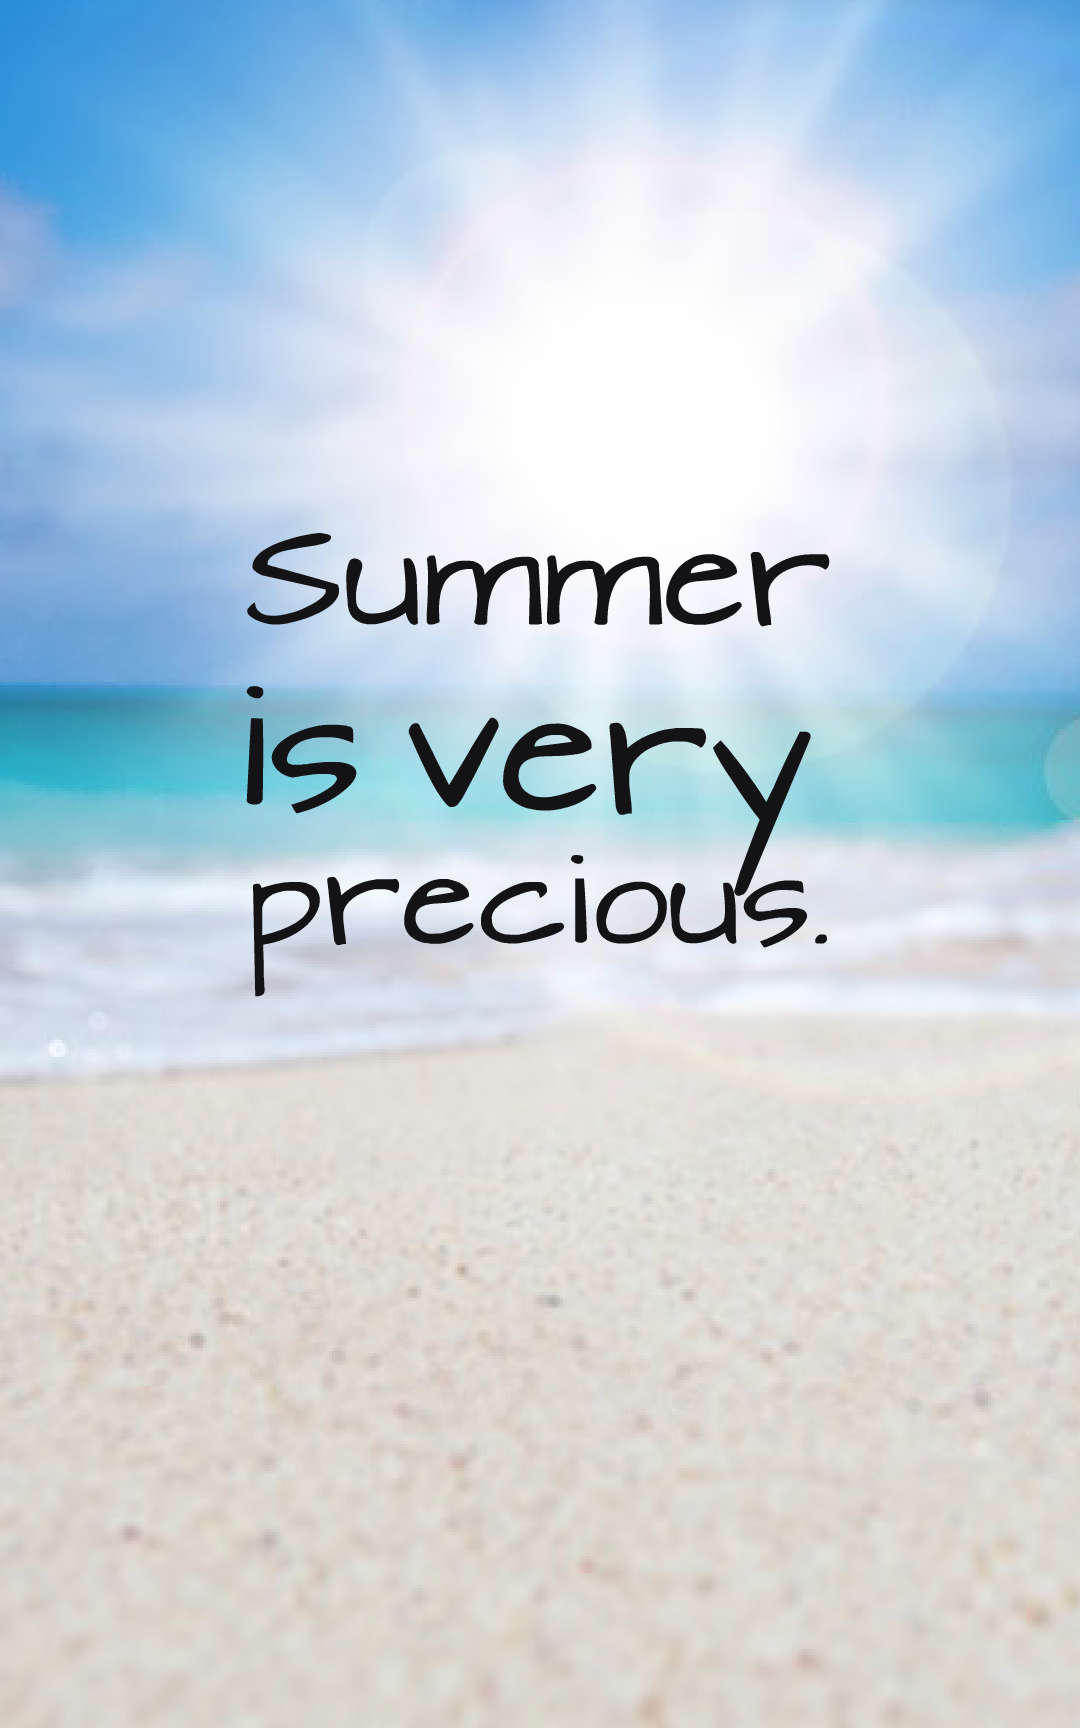 Short Summer Quotes 45 Beautiful Quotes About Summer